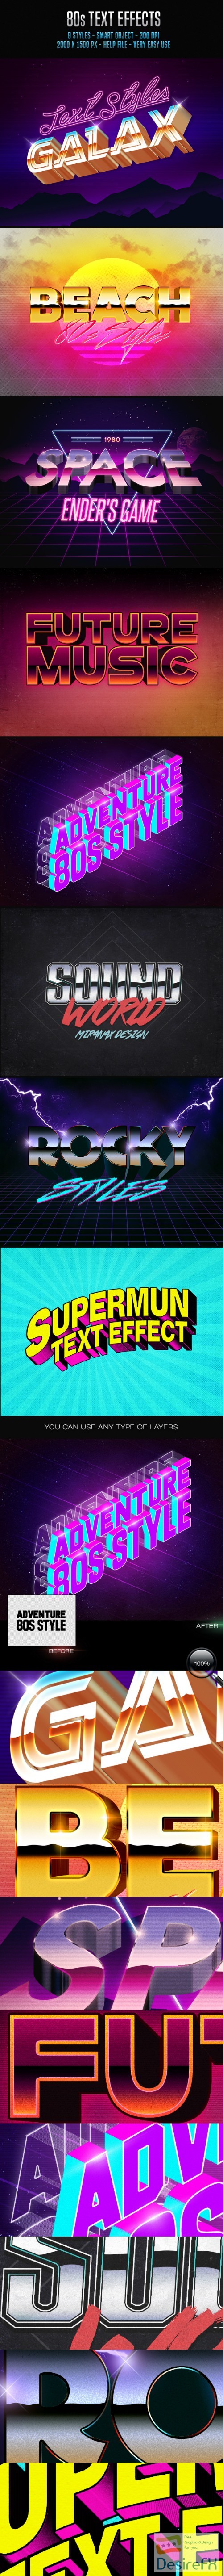 80s Text Effects Vol. 1 15163955